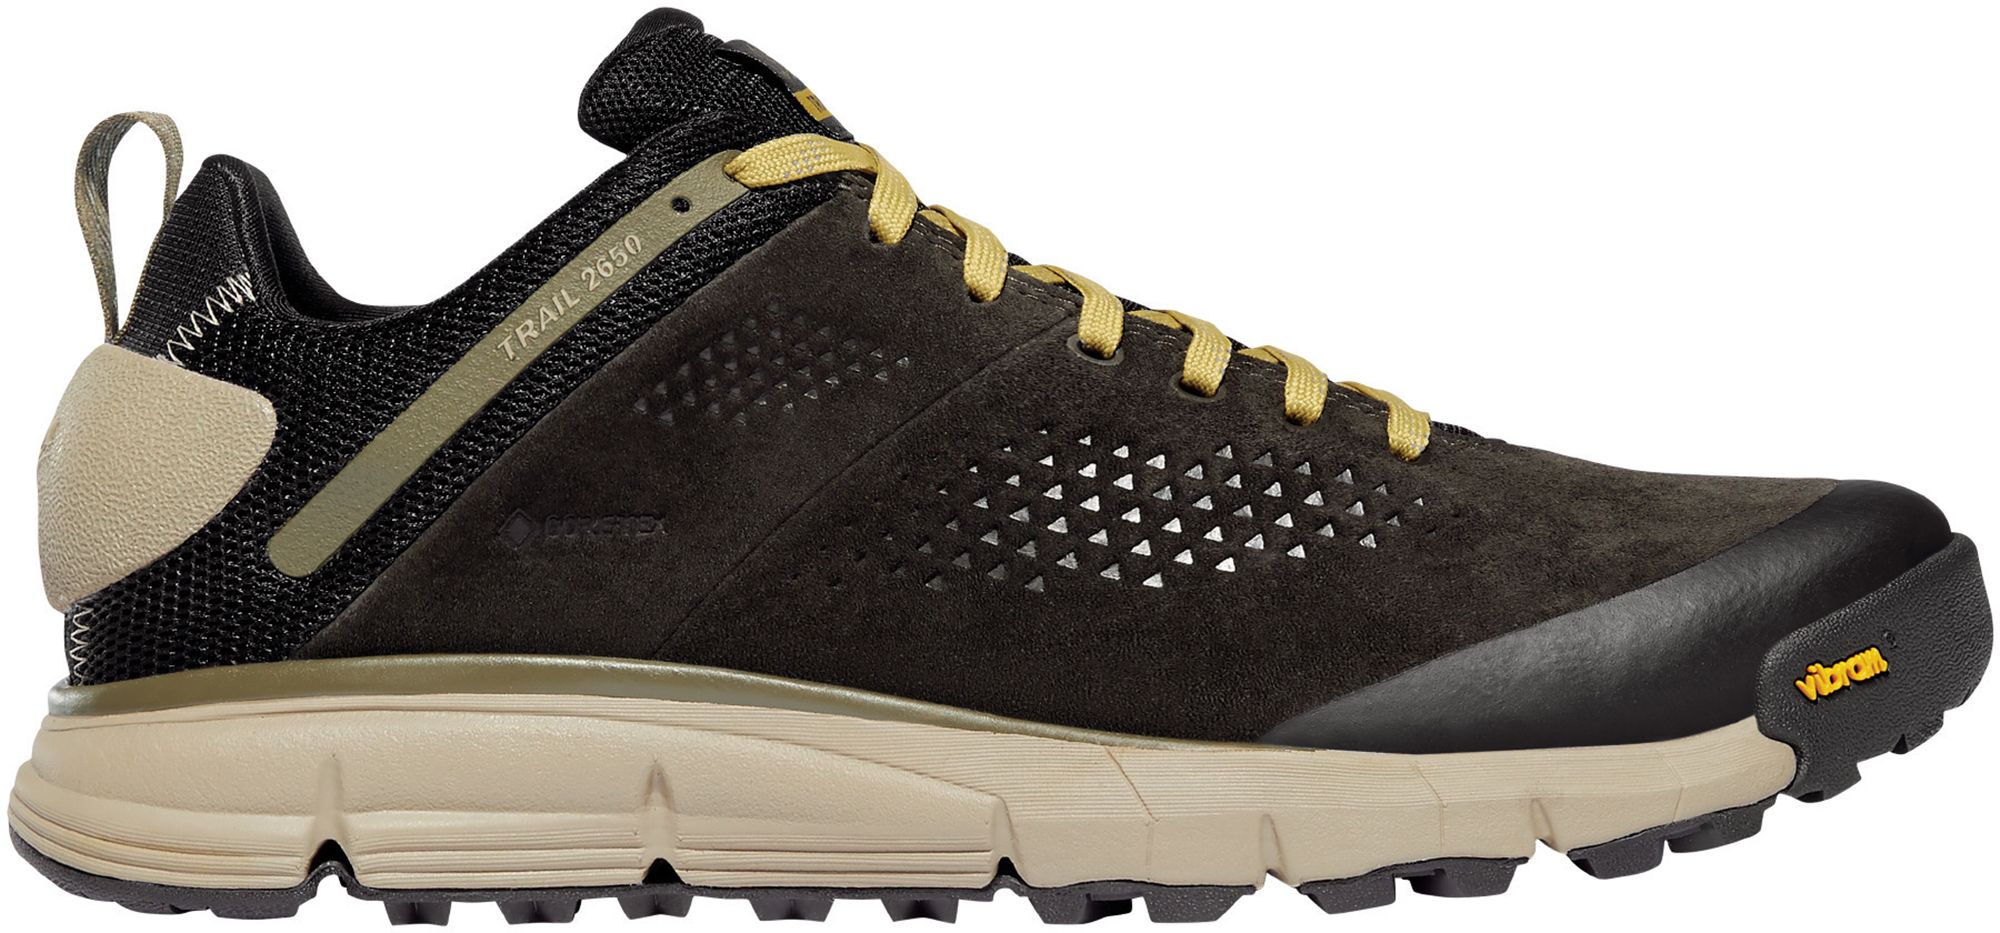 Photos - Trekking Shoes Danner Men's Trail 2650 GTX Hiking Shoes, Size 9.5, Black Olive/Yellow | F 